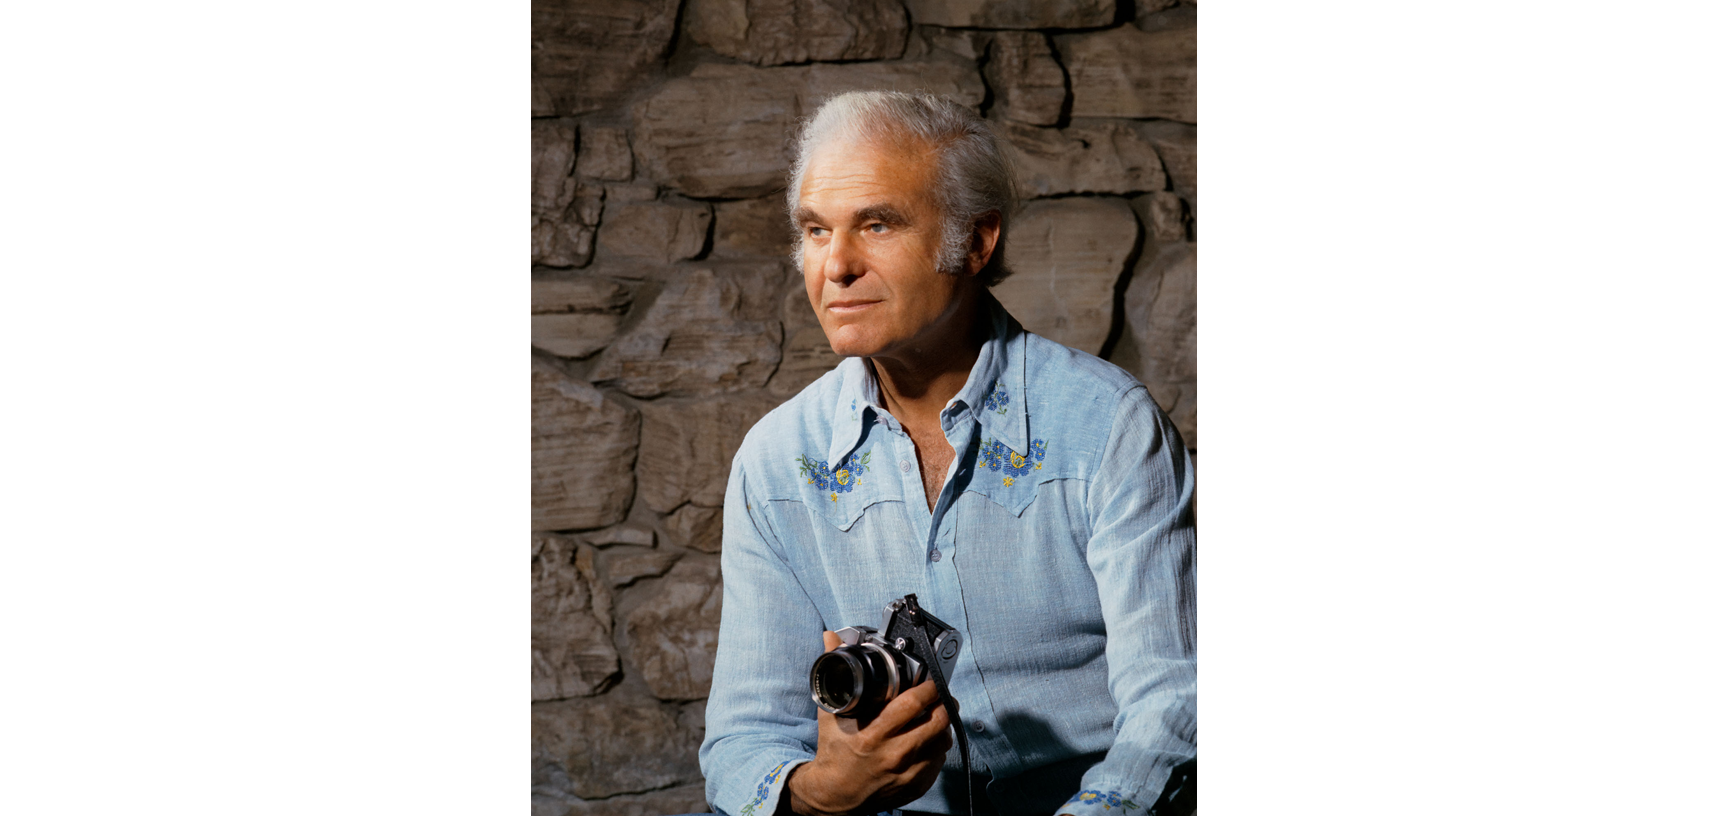 Portrait of Alan Lloyd Hodgkin - an older white male with white hair, dressed in a light blue shirt, sitting in front of a stone wall, holding a camera in one hand and looking off to the left